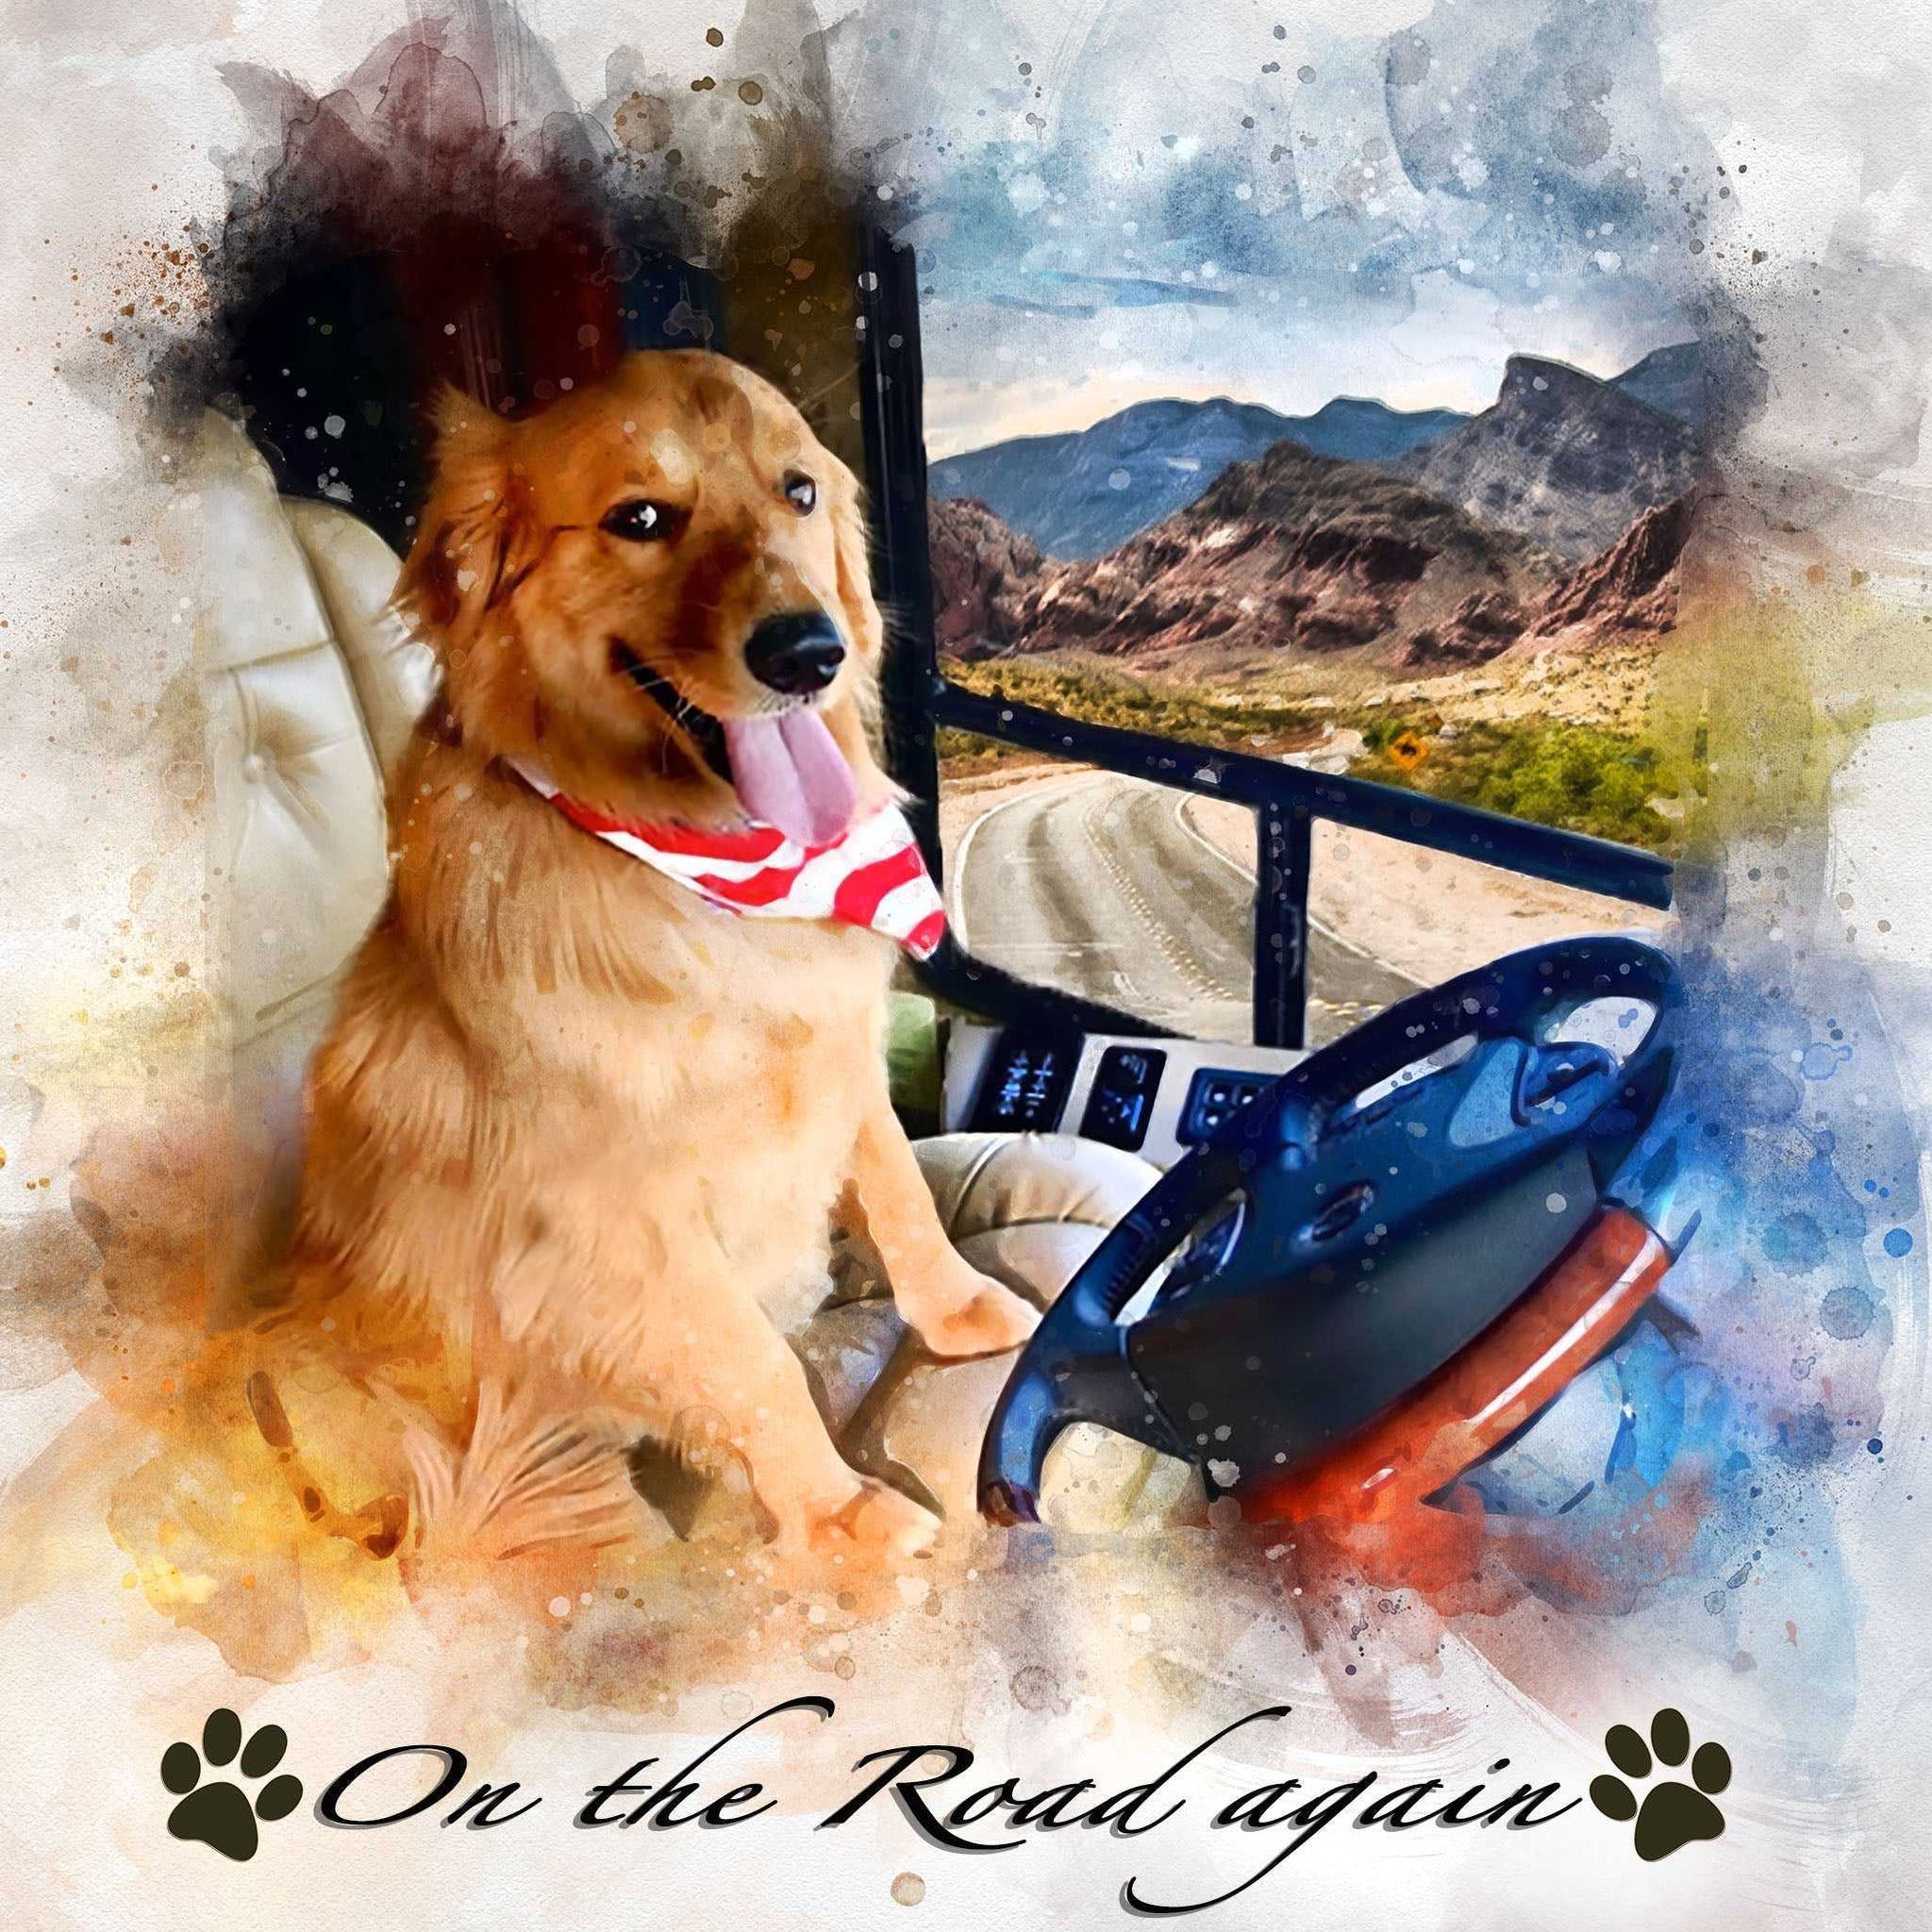 Camping Decor | Custom Portraits for RV Owners - FromPicToArt